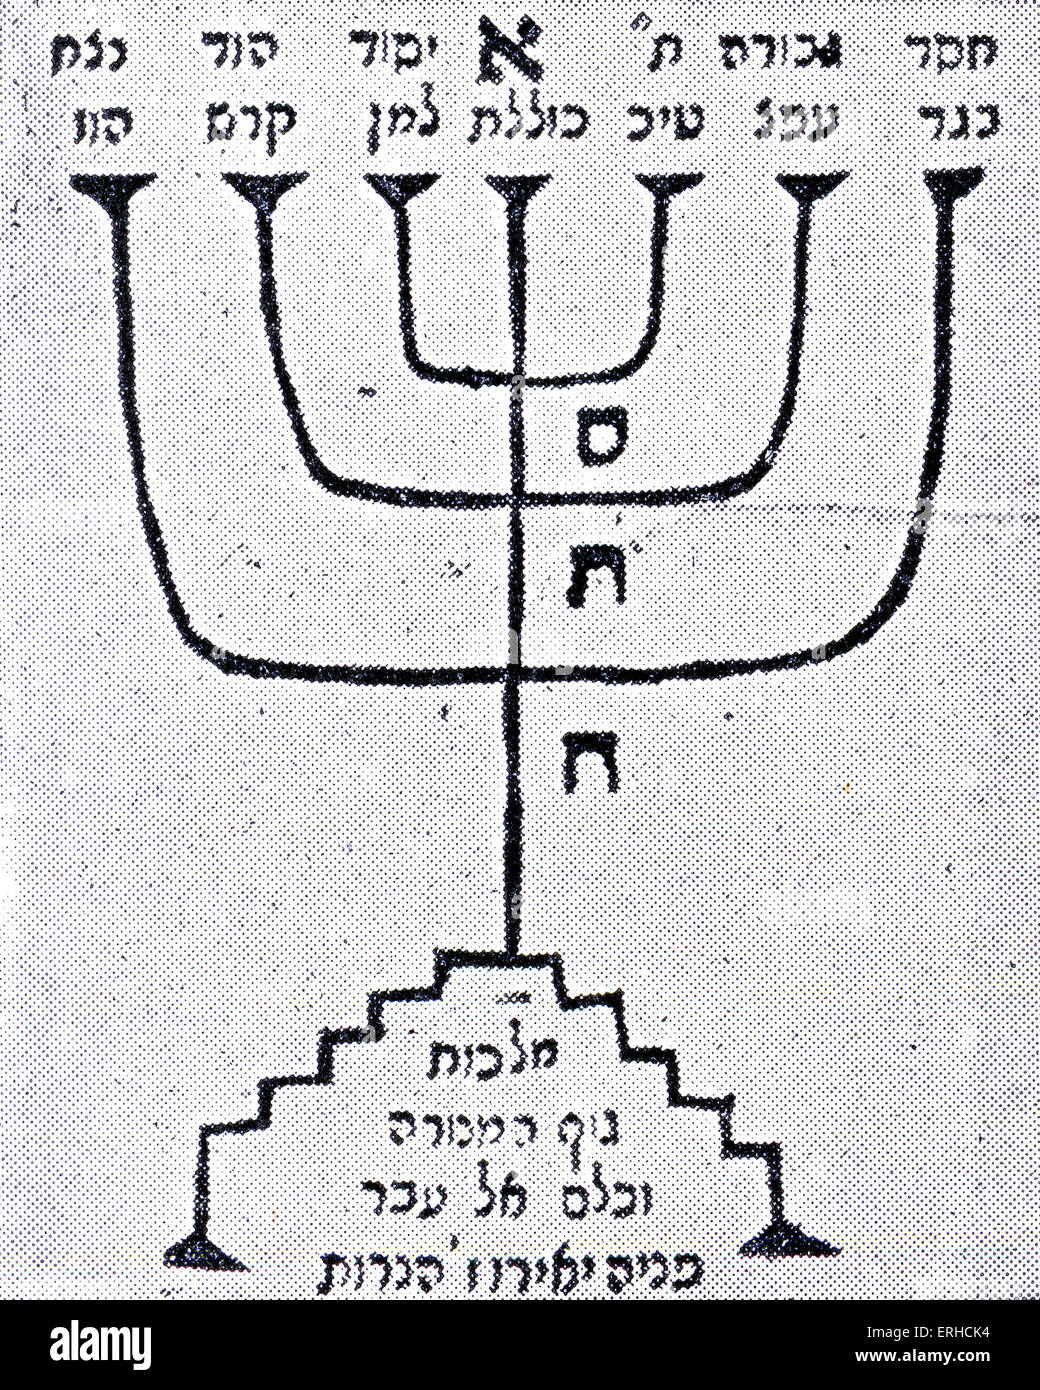 Cabala/ Kabbalah. The Sephirot arranged in the form of a Menorah (seven branched cnadlestick). (Source: ASSIS RIMONIM (ESSENCE Stock Photo